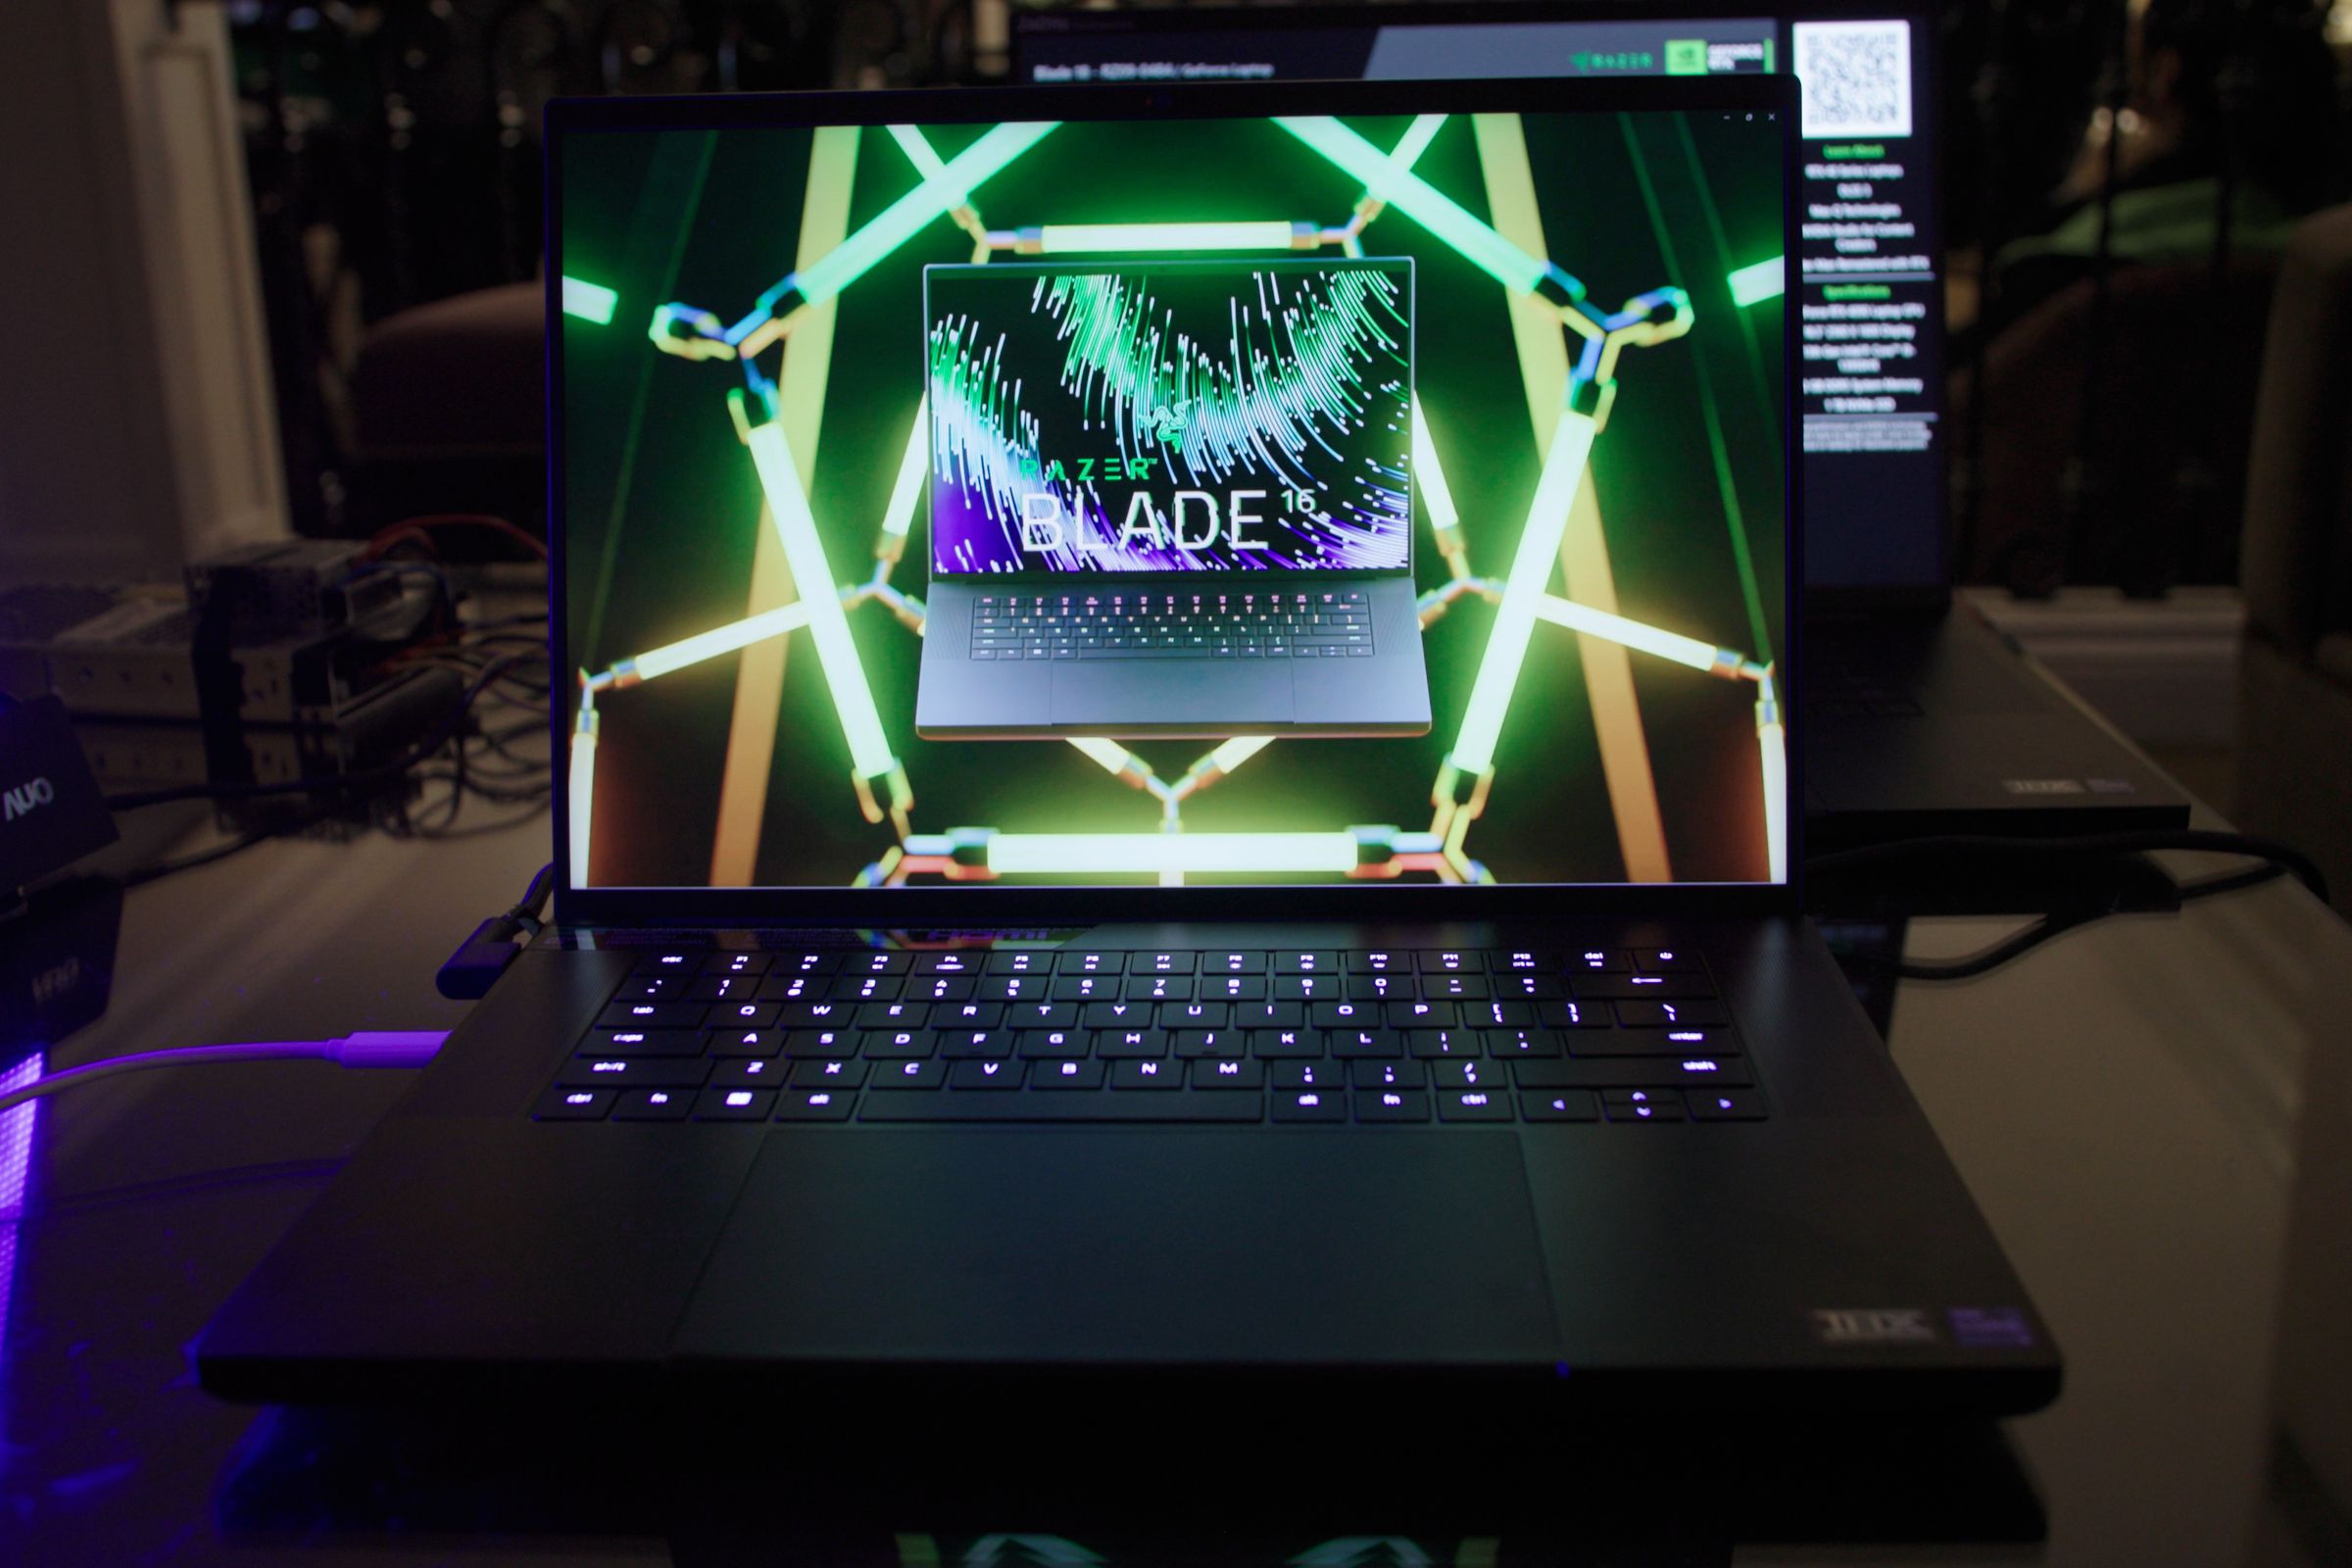 The Razer Blade 16 displaying a picture of itself over a neon grid.